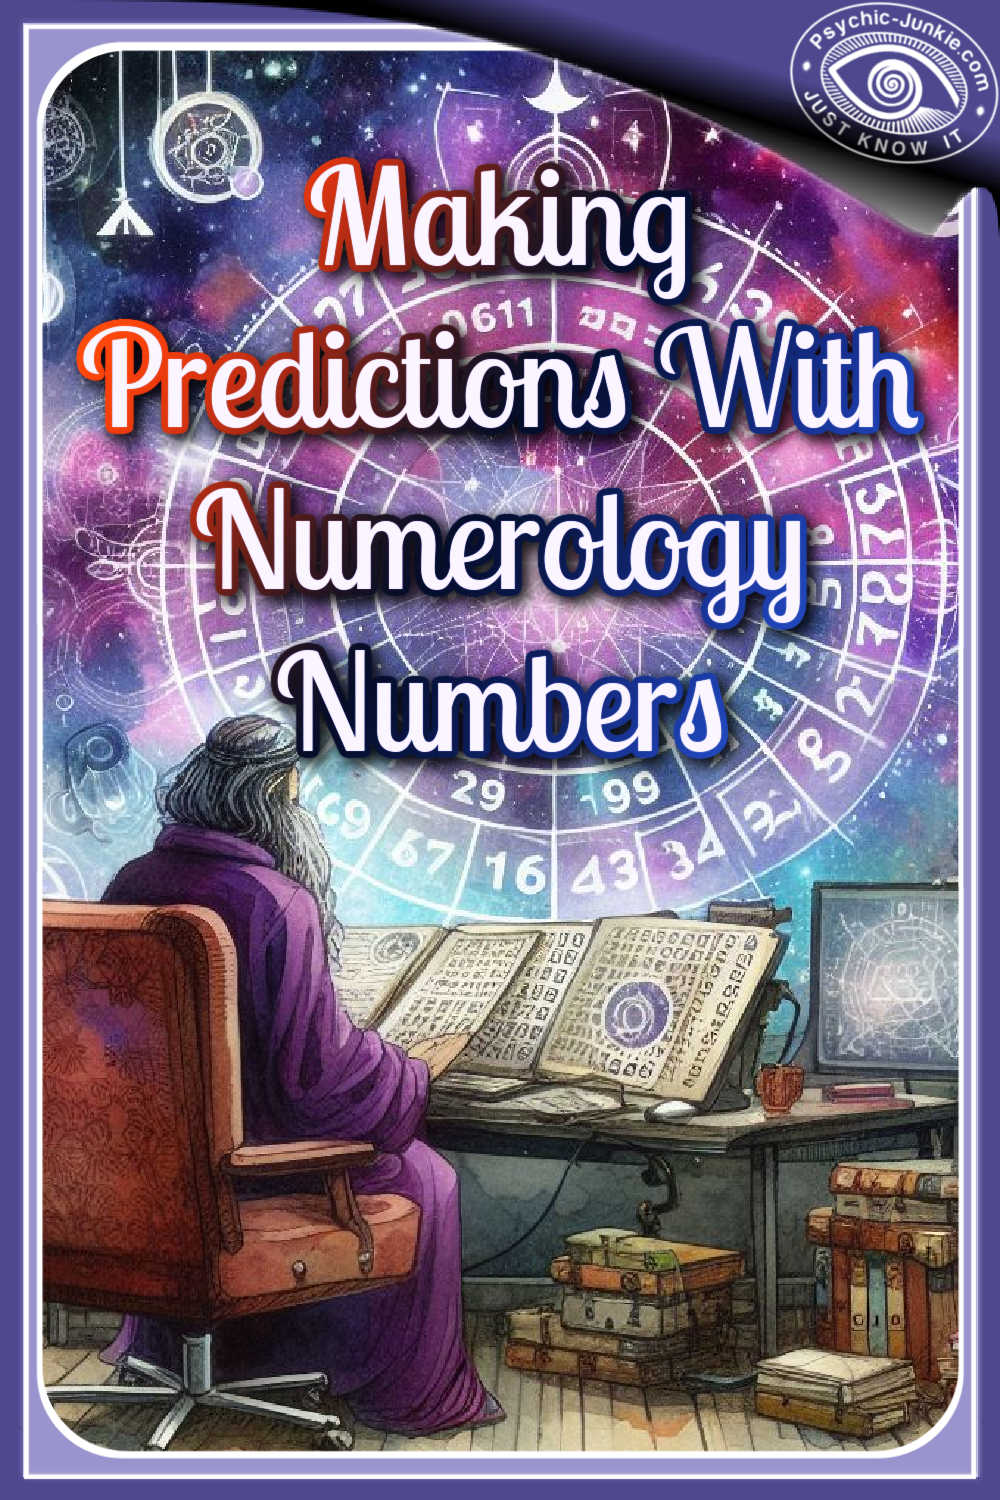 Your numerology numbers and their meanings